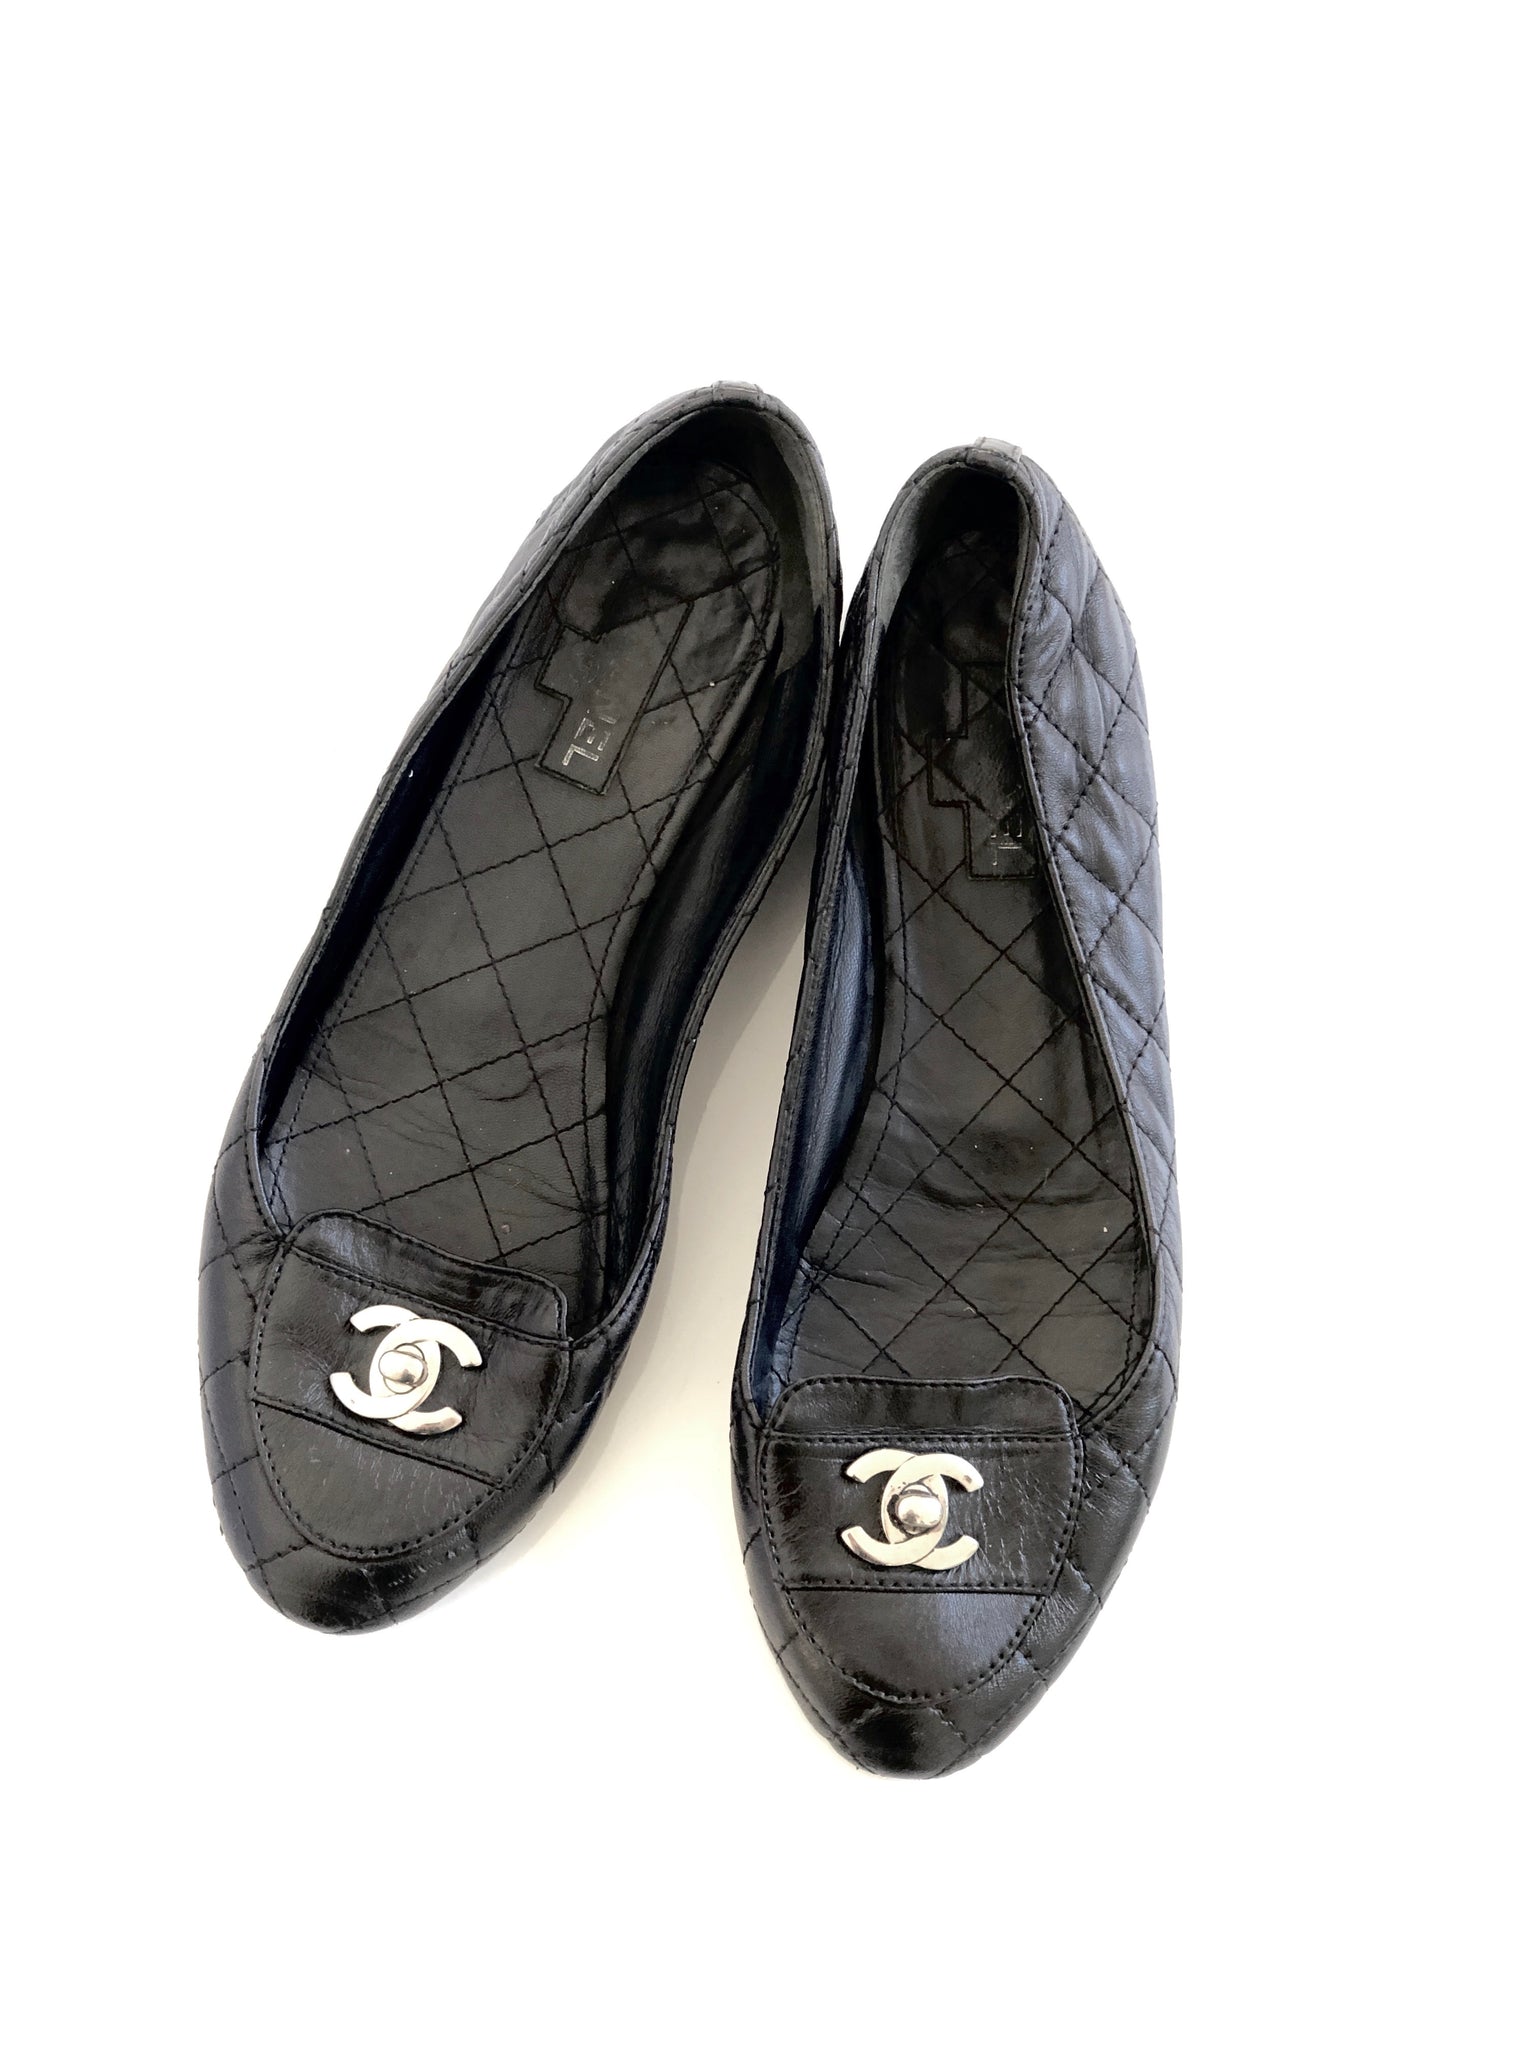 chanel loafer price